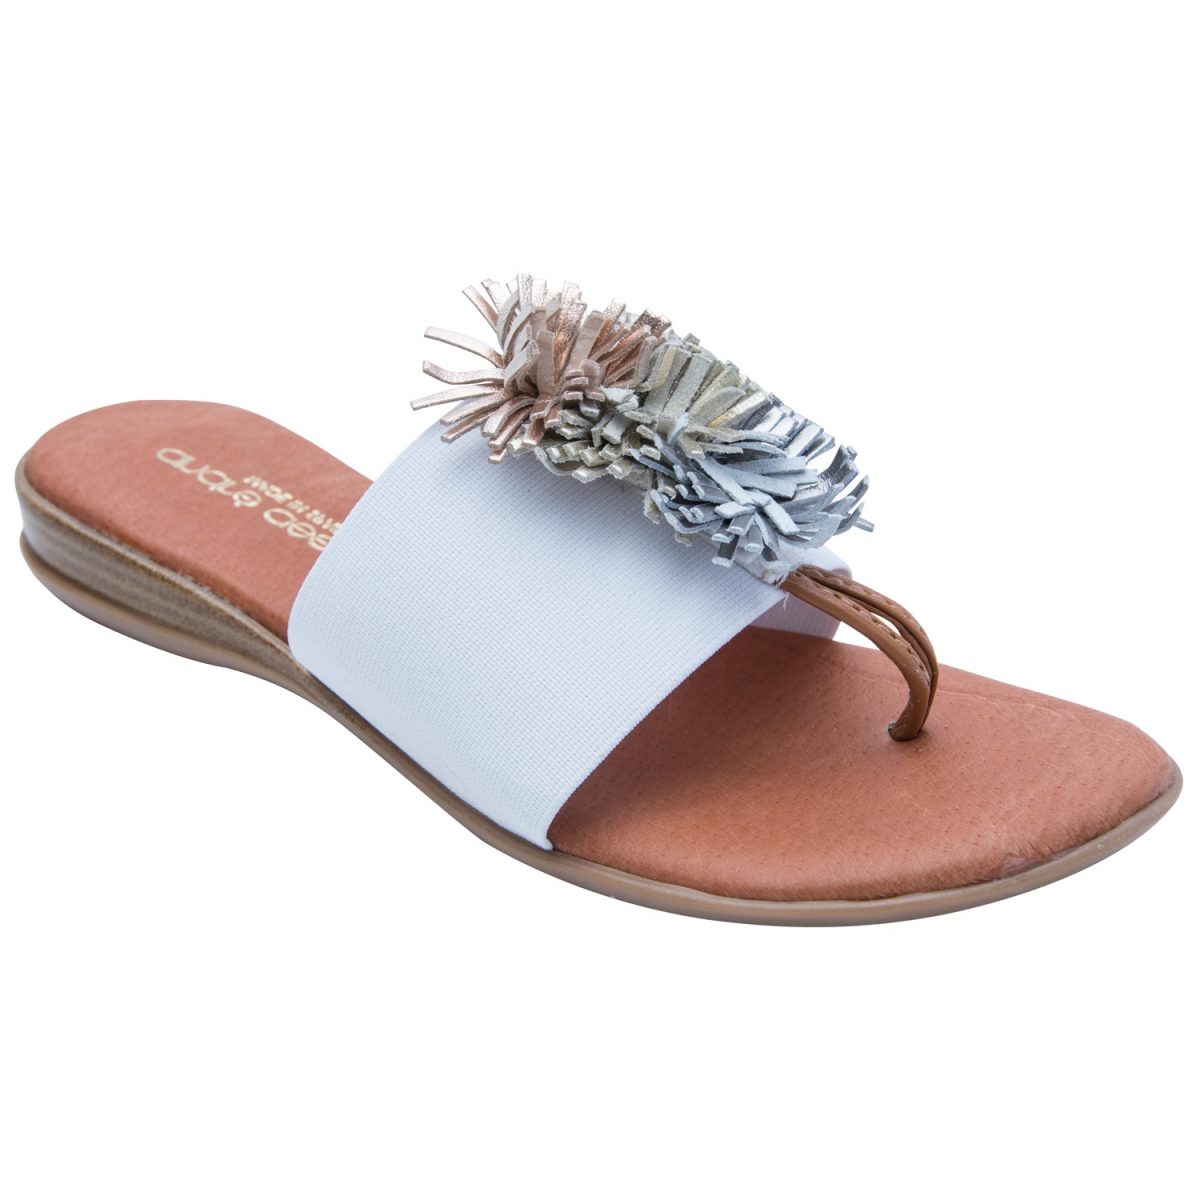 Andre Assous Novalee Woman's Sandal with Fringe Detail| Ooh! Ooh! Shoes woman's clothing and shoe boutique naples, charleston and mashpee.